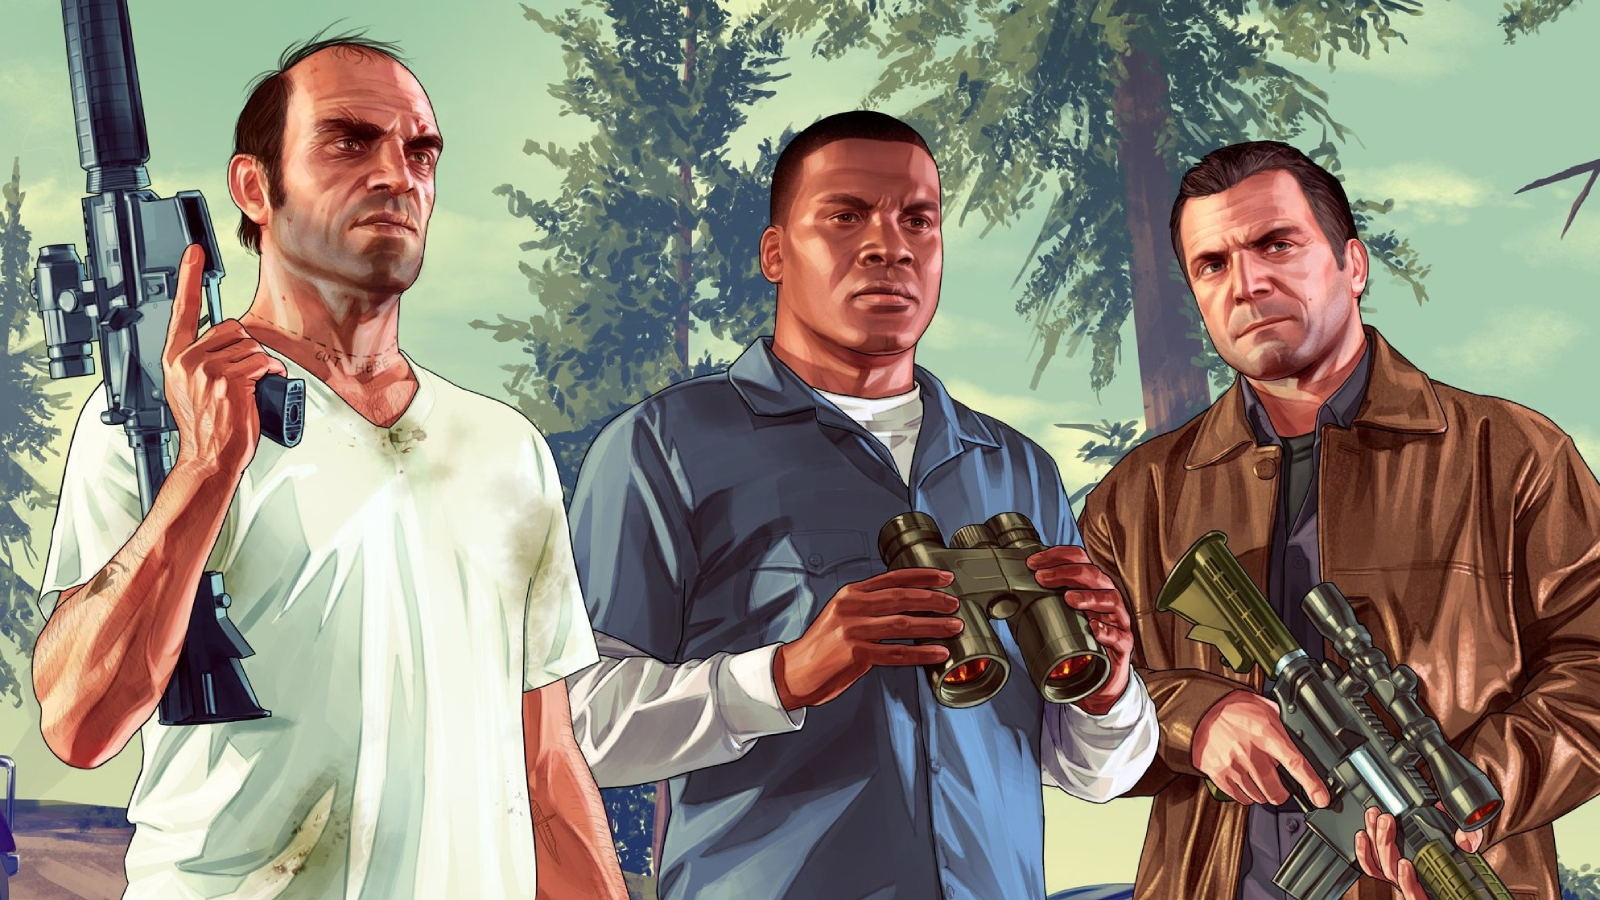 Image for Transphobic content has been removed from the GTA 5 remasters